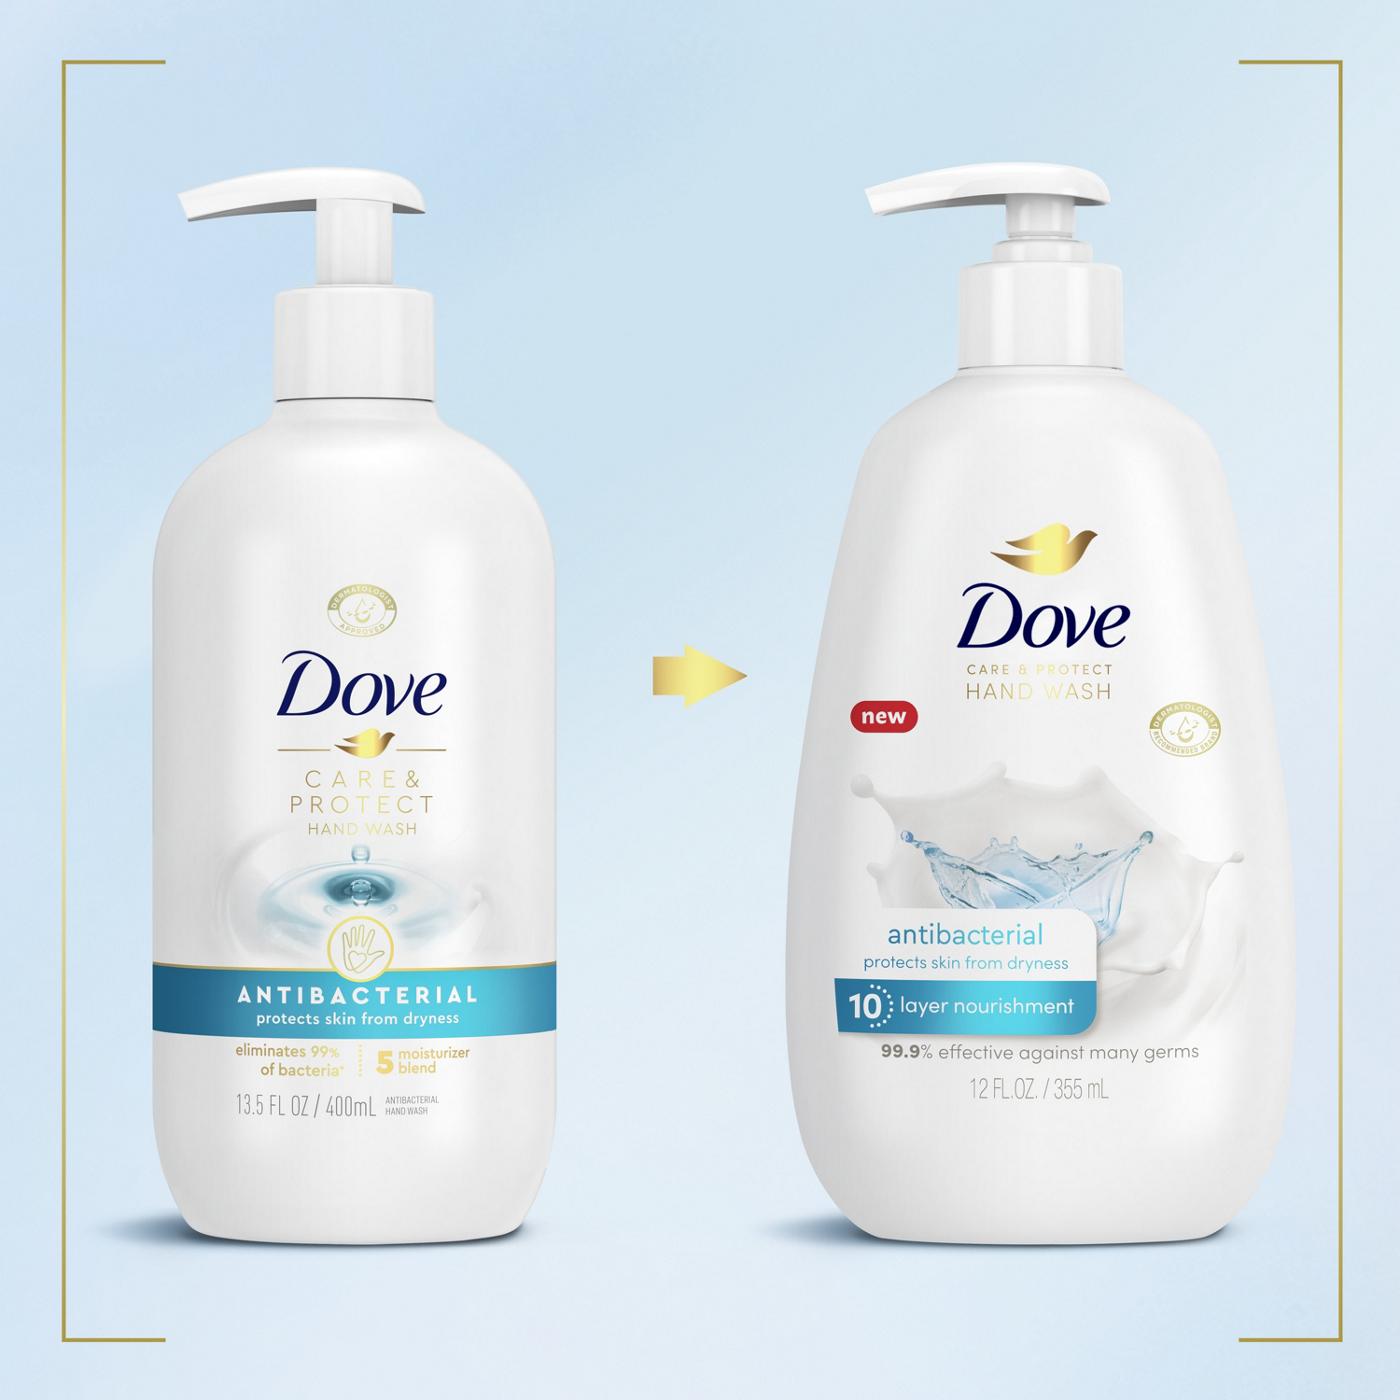 Dove Care & Protect Antibacterial Hand Wash; image 7 of 9